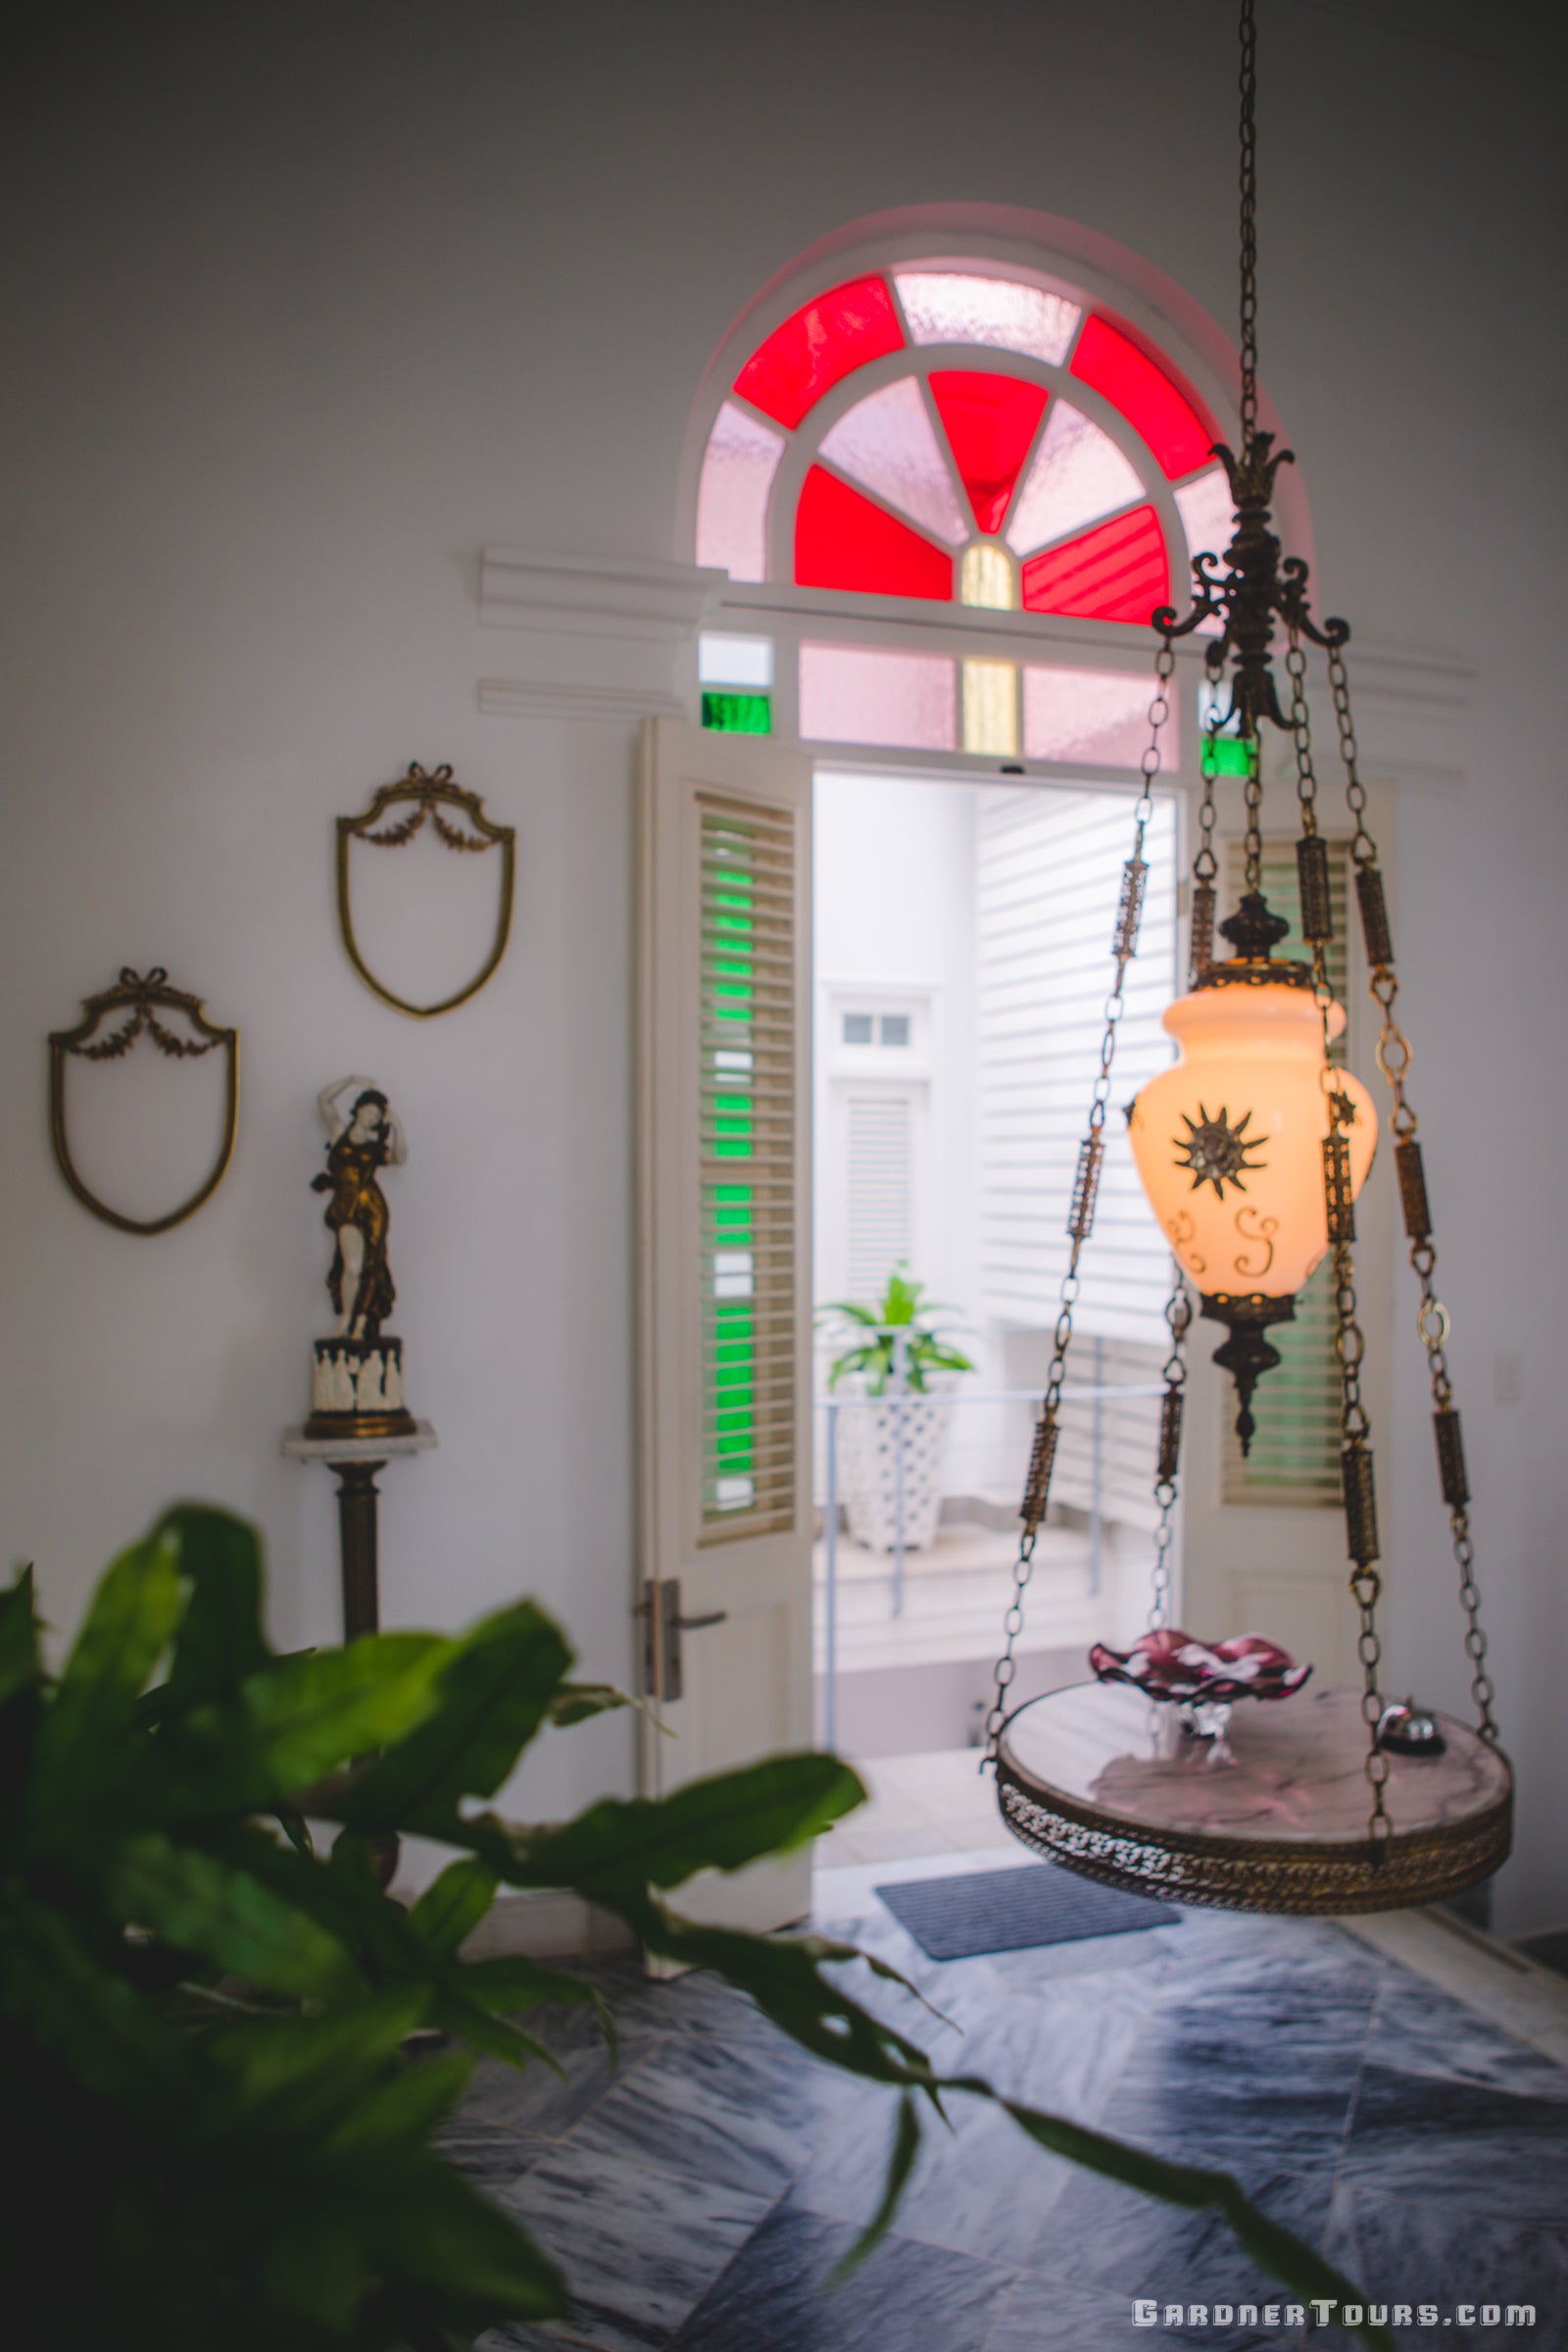 Breezeway with Classic Cuban Decorations and Stained Glass in a 4-Star BnB in Old Havana, Cuba